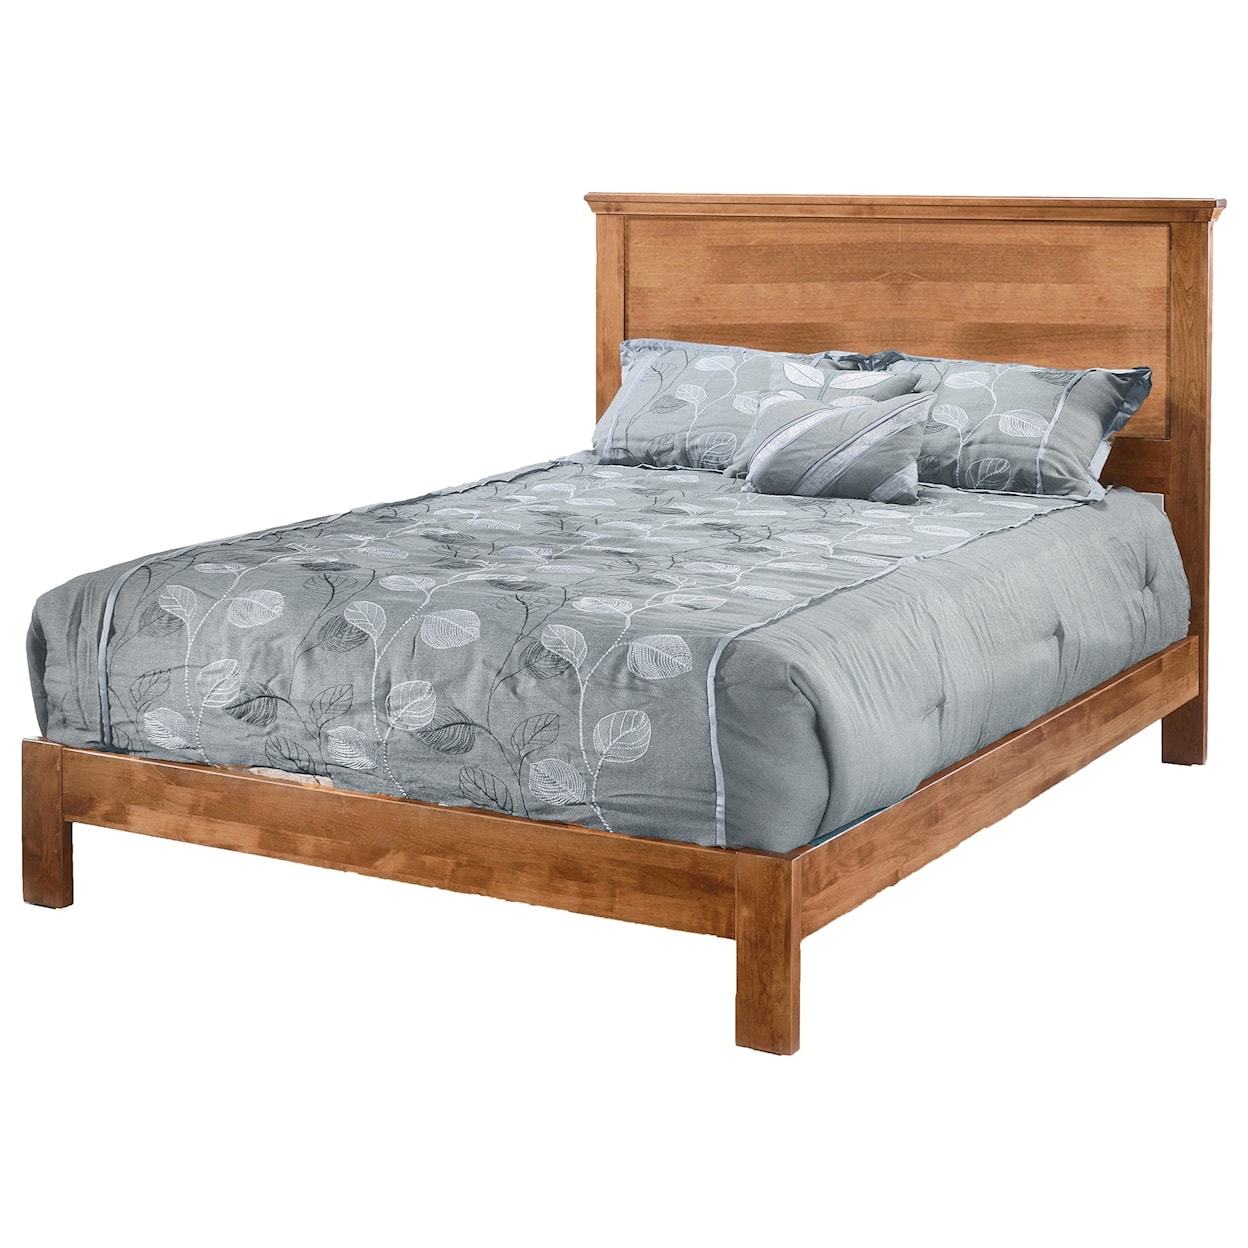 Archbold Furniture Misc. Beds Queen Plank Bed